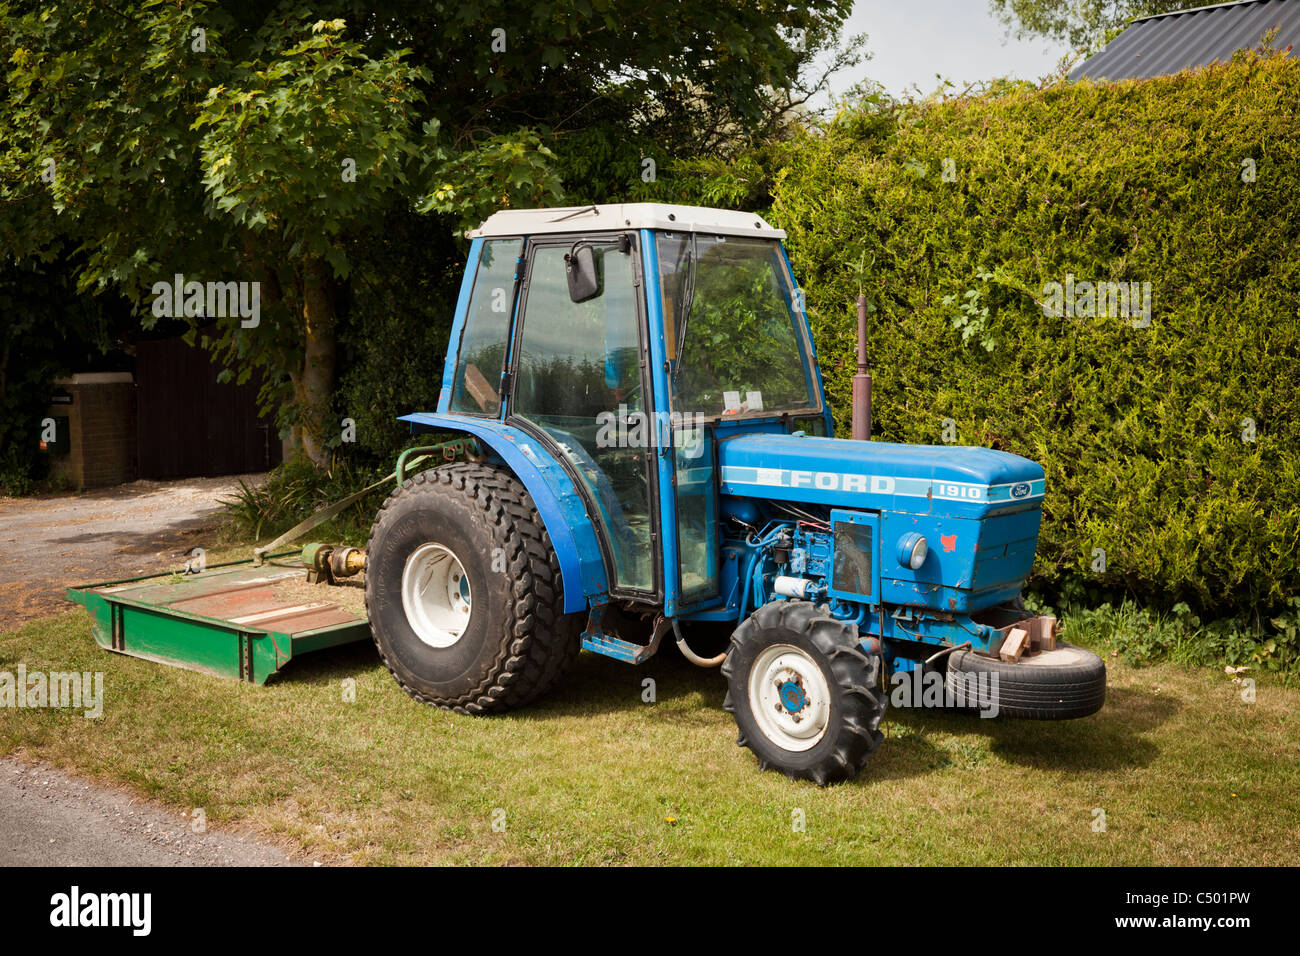 Ford 1910 compact vintage tractor with grass cutting attachment Stock Photo